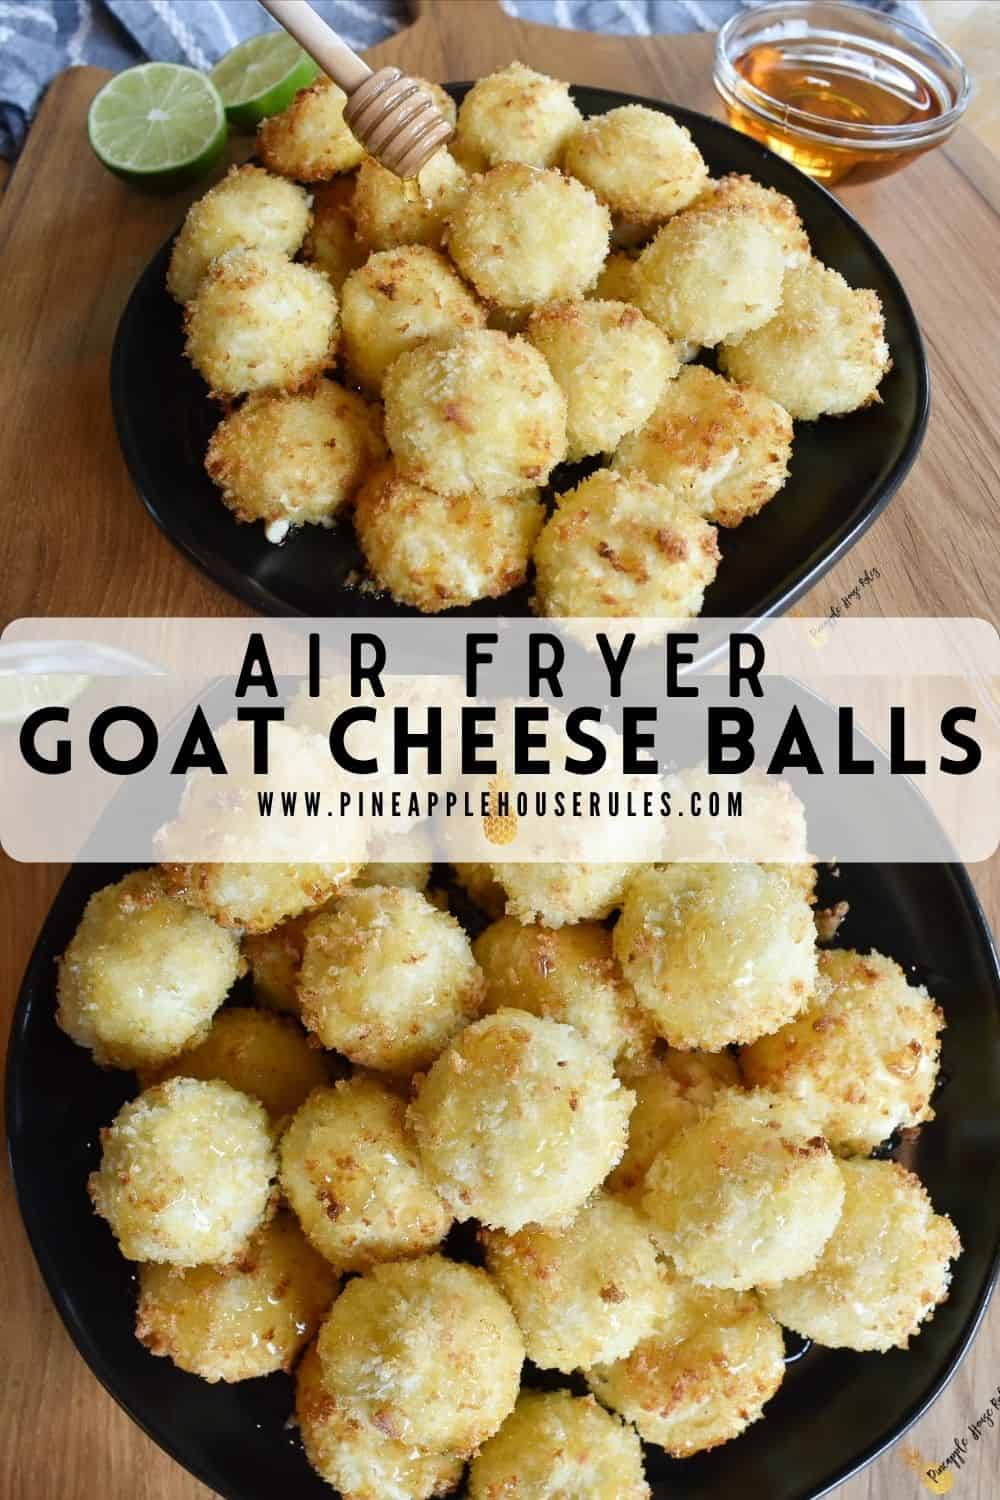 These Air Fryer Goat Cheese Balls are the perfect finger food appetizer for any occasion! Just make the cheese mixture, chill, then air fry. Air Fryer Goat Cheese Balls | Air Fryer Recipes | Air Fryer Recipes Healthy | Air Fryer Appetizers | Appetizer Recipes | Appetizers | Appetizres for Party | Appetizer Snacks | Appetizers Easy Finger Food | Appetizers Easy | Appetizer Bites | Fried Goat Cheese | Party Food | Party Snacks | Girls Night | Finger Foods | Finger Food Appetizers | Finger Food